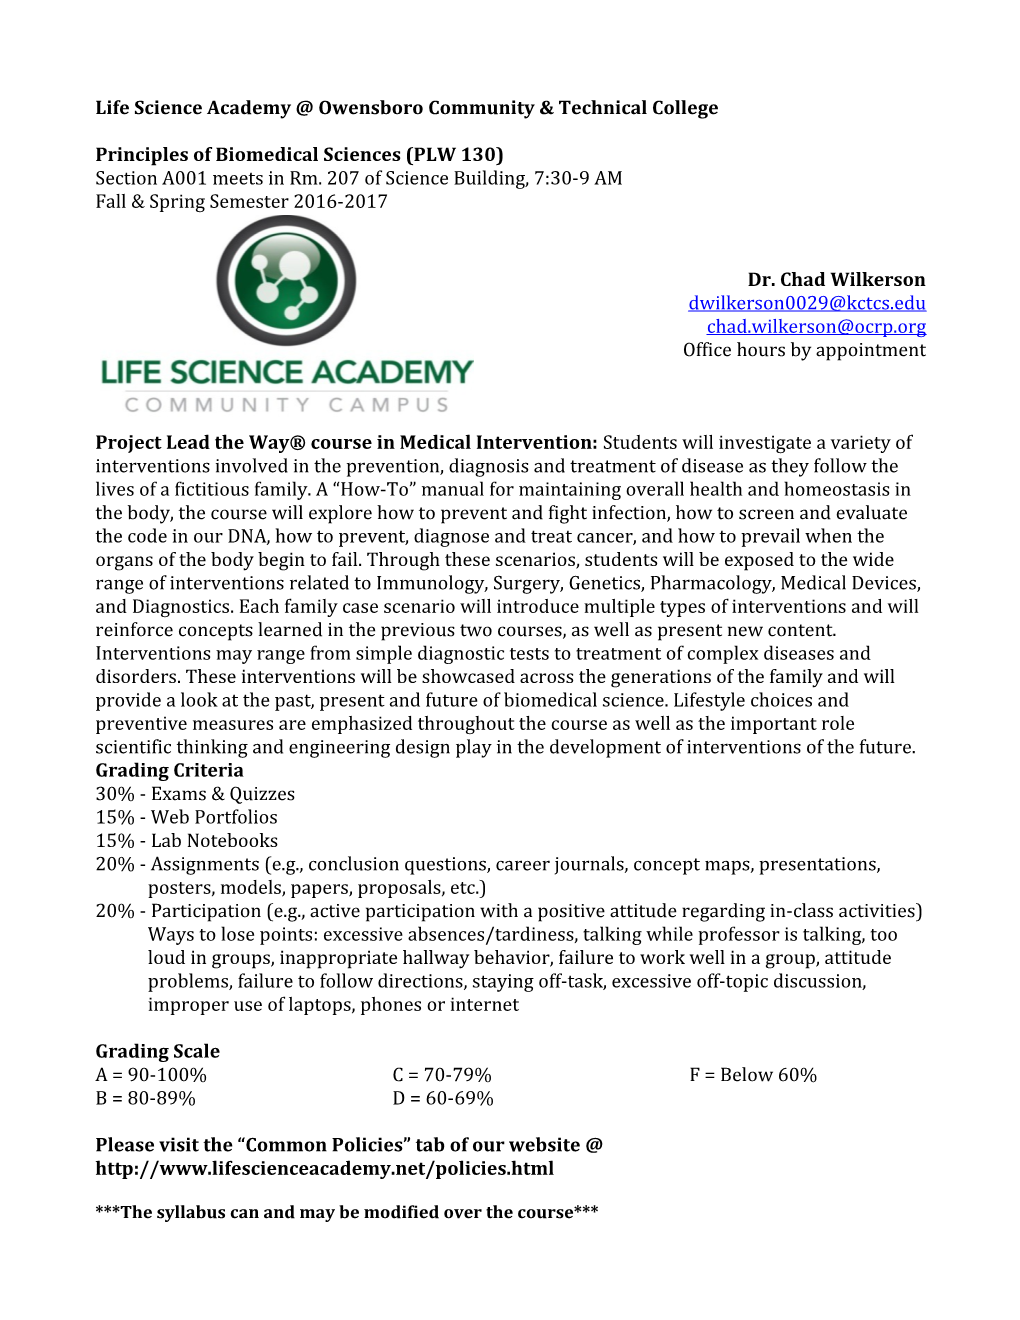 Life Science Academy Owensboro Community & Technical College